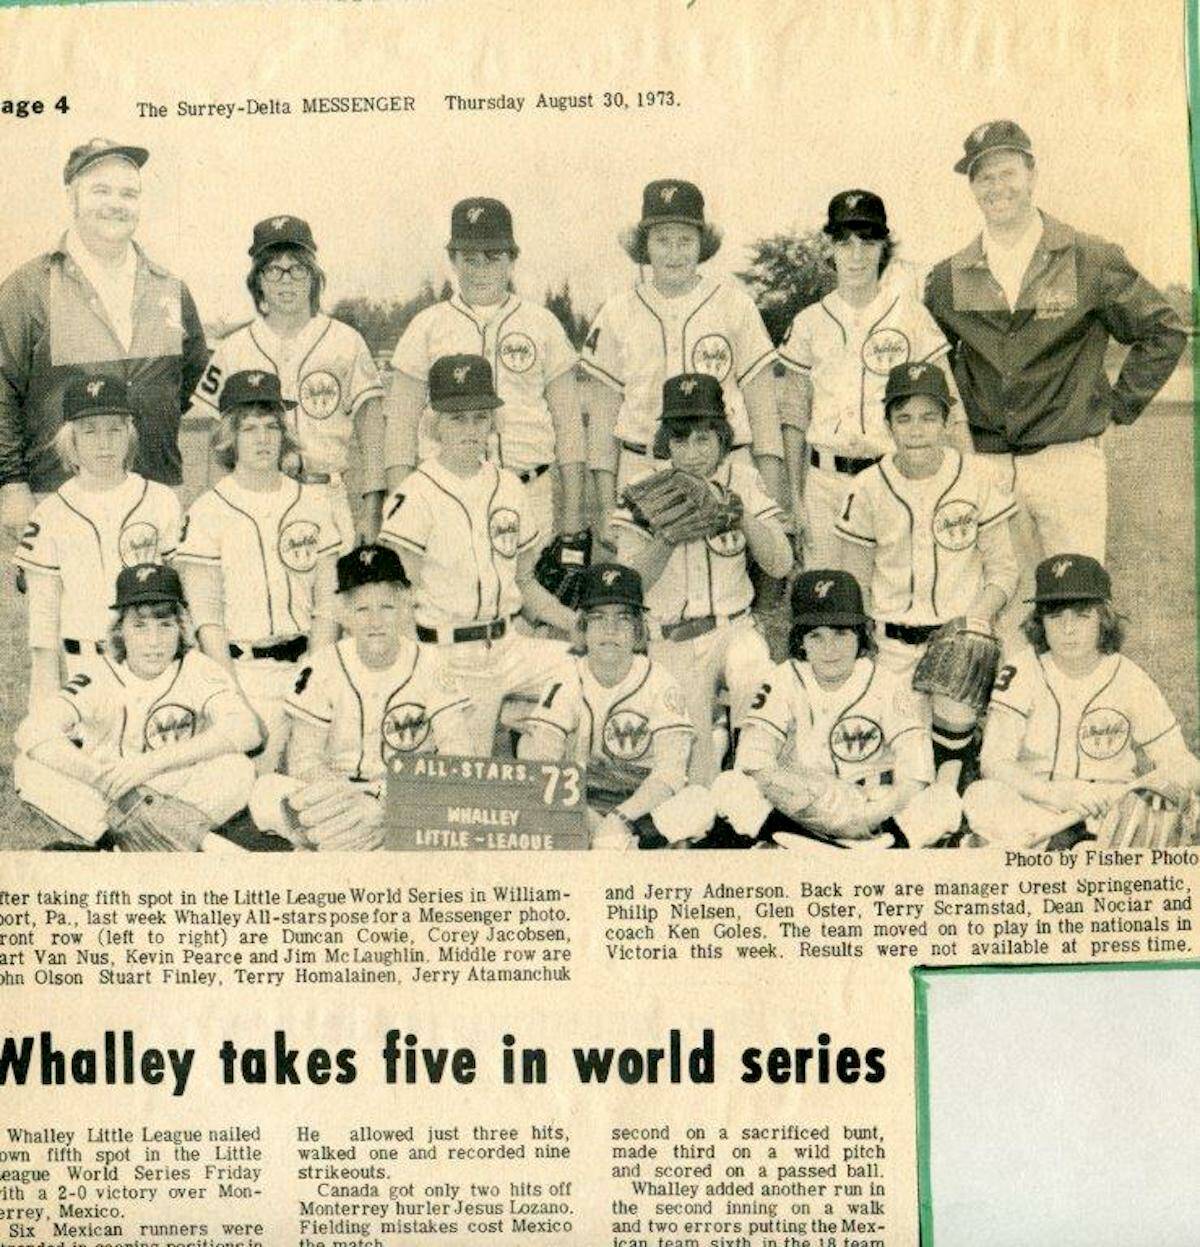 Story in Surrey-Delta Messenger newspaper about Whalley at the Little League World Series. (Submitted photo)